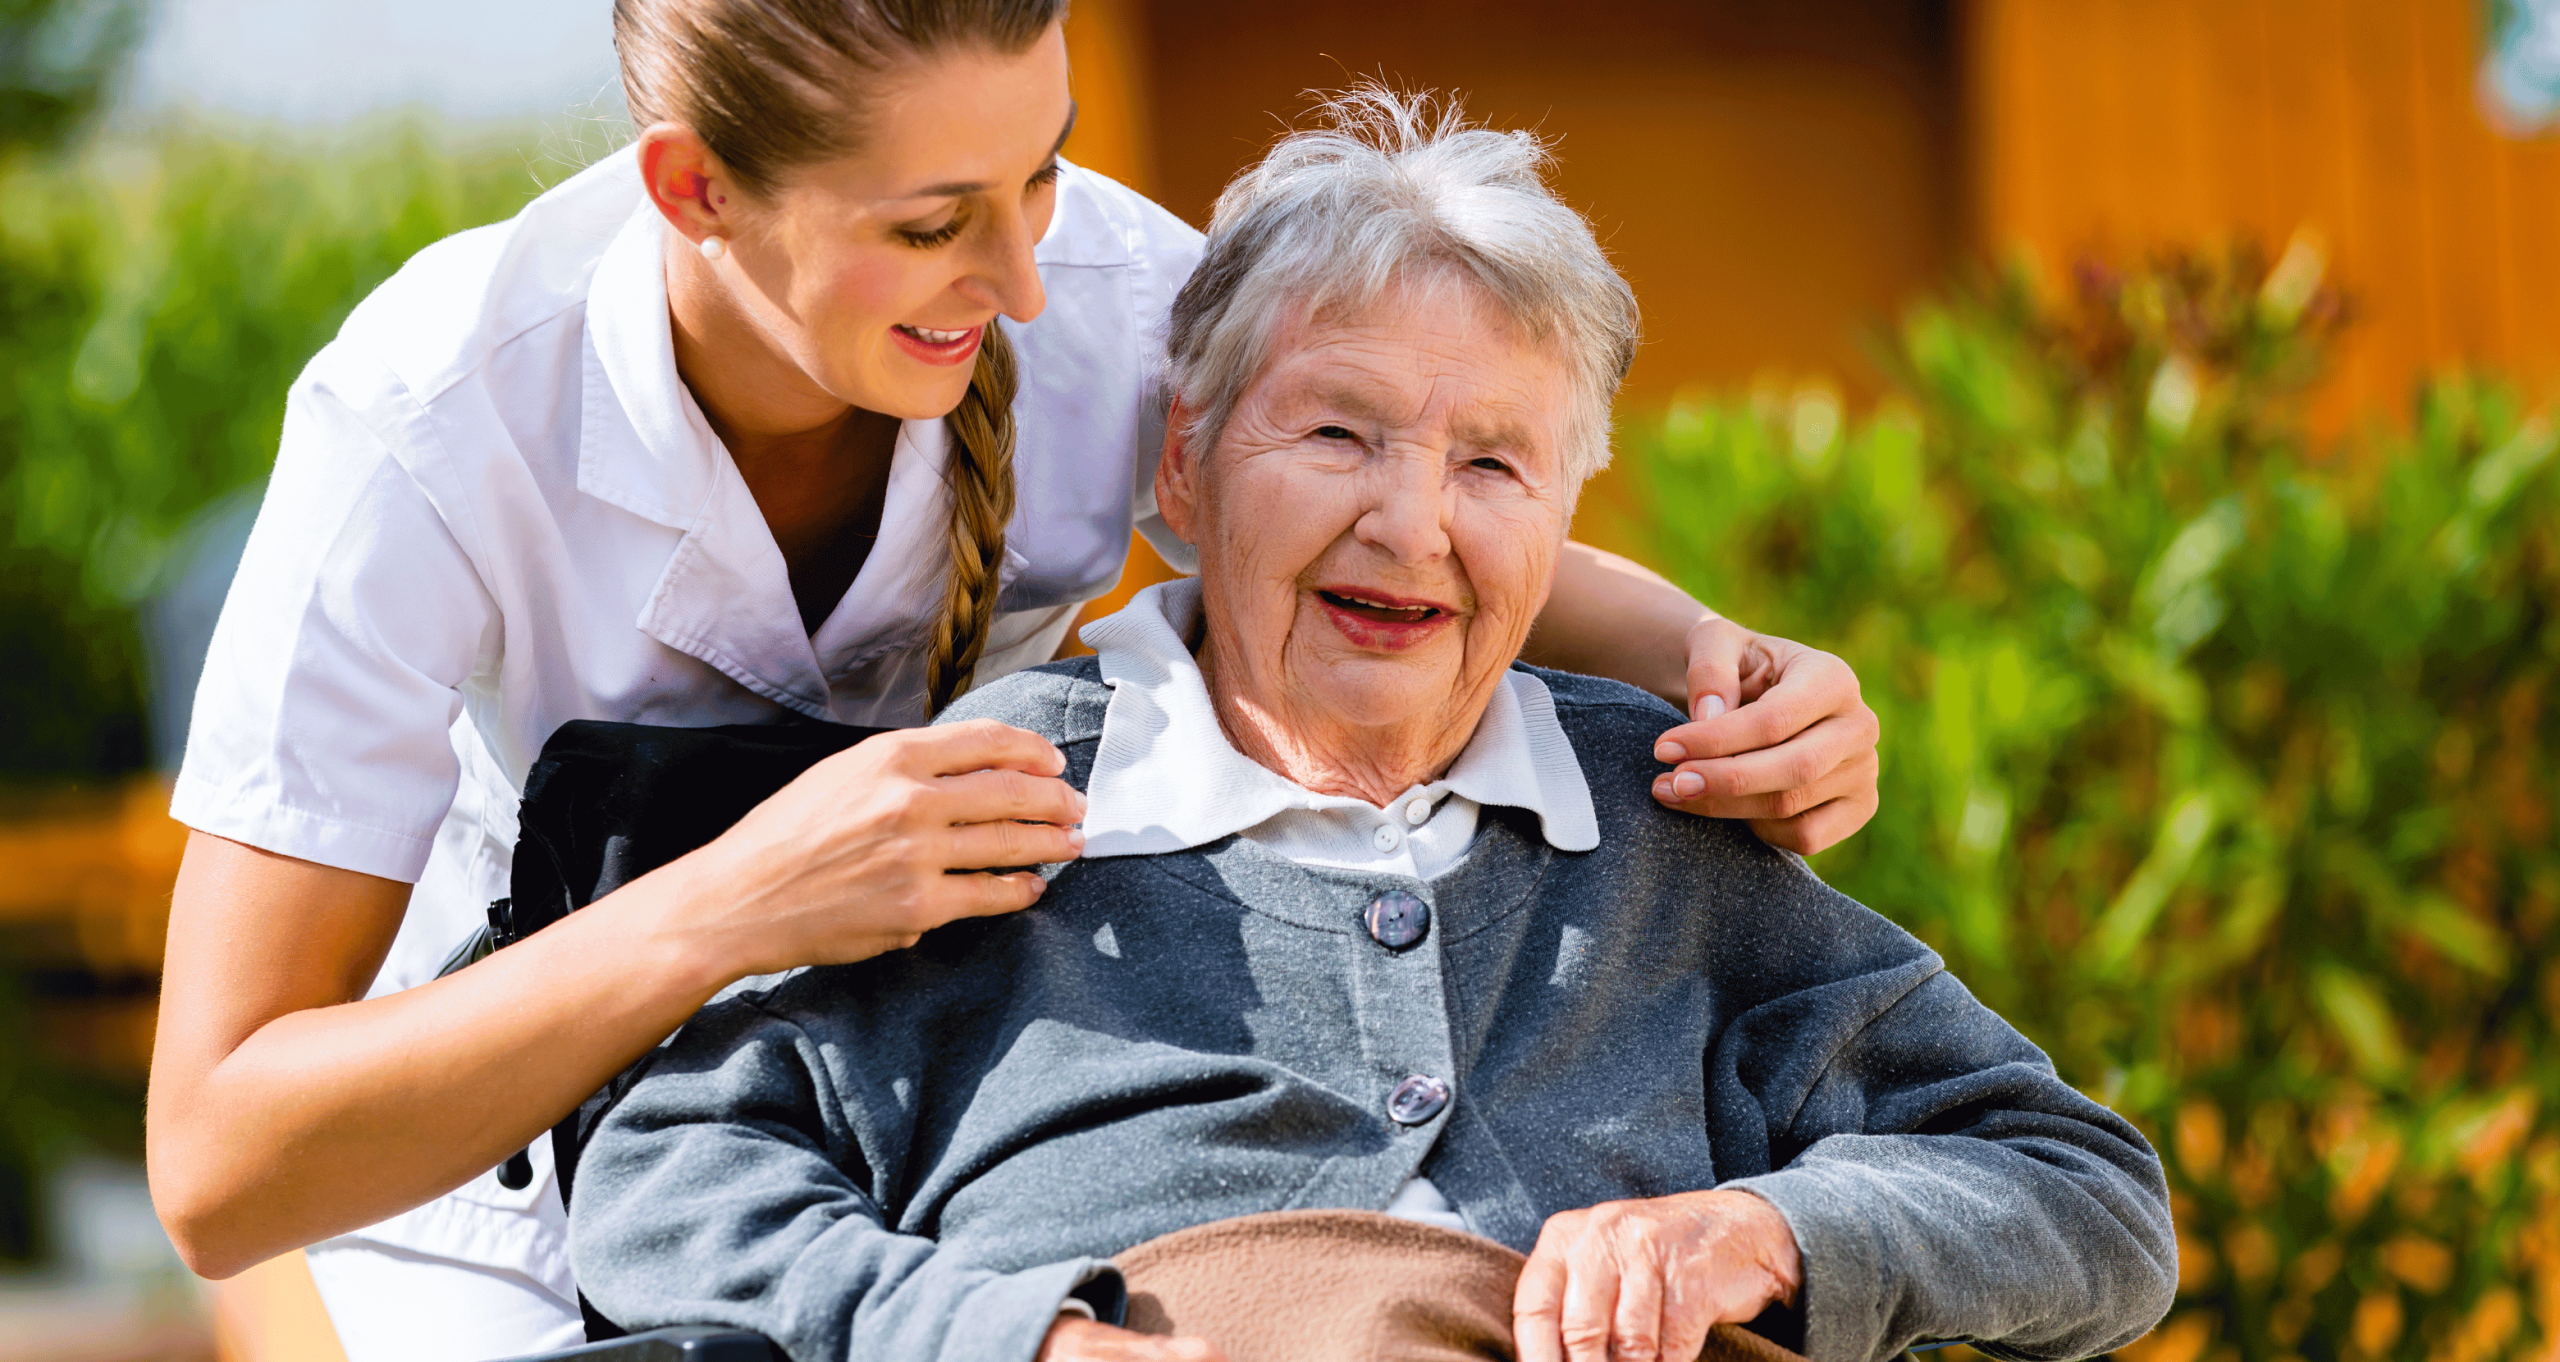 Lutheran Services in America Statement on CMS Skilled Nursing Facility Minimum Staffing Rule